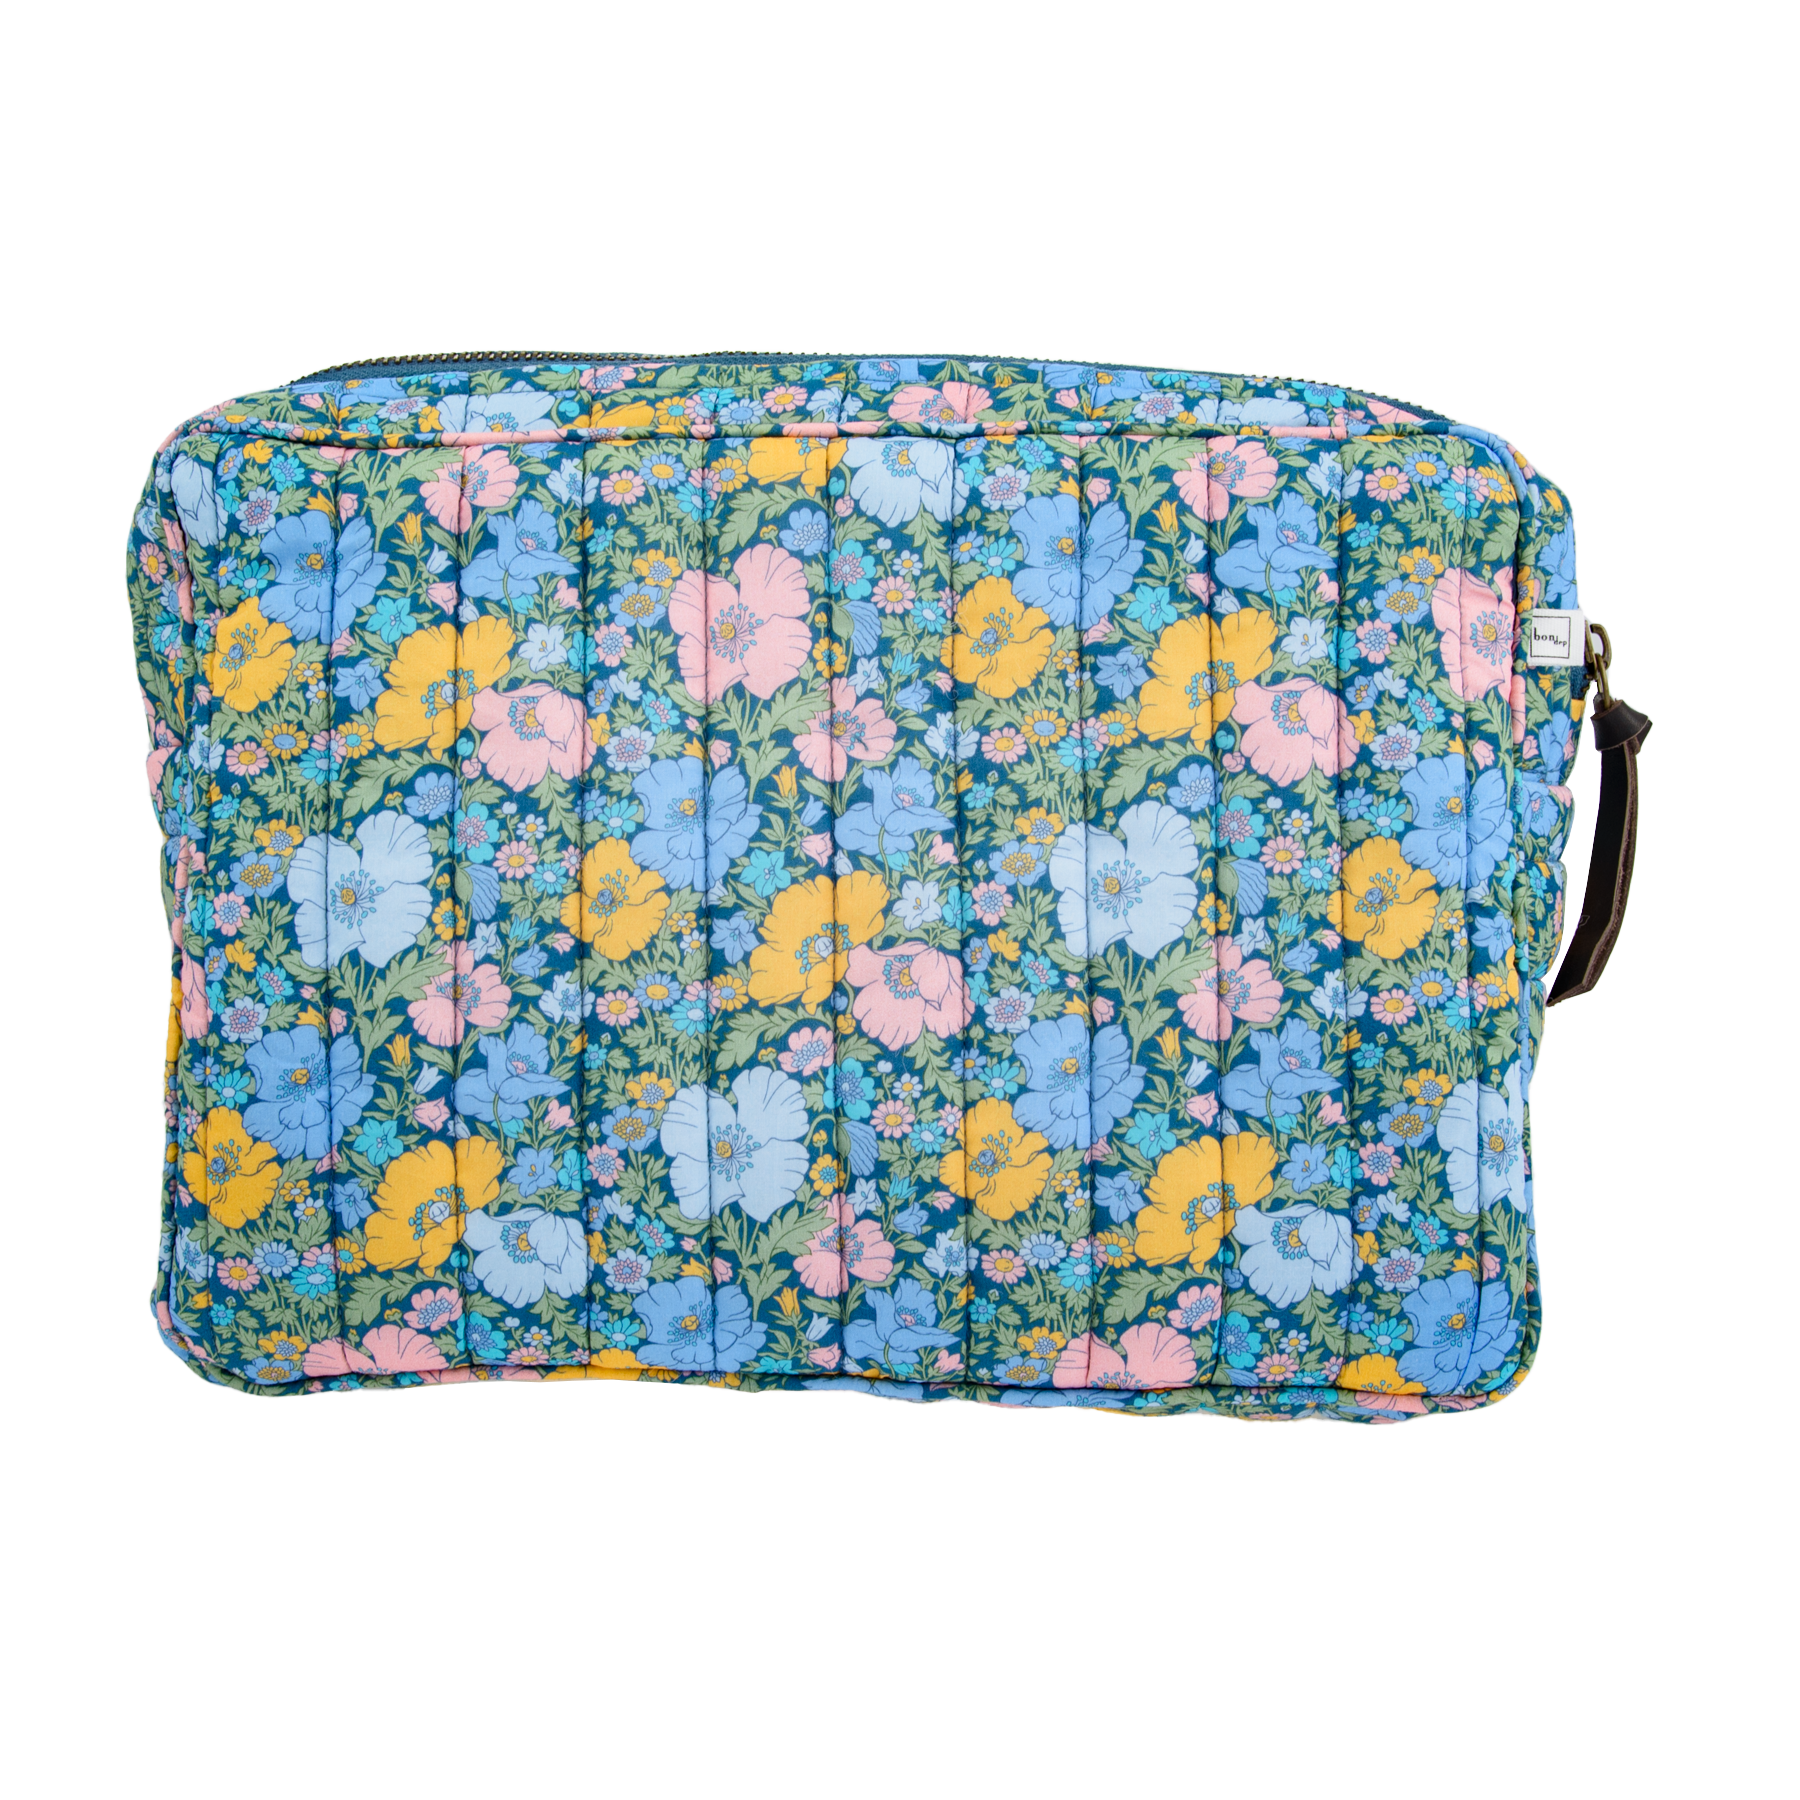 POUCH BIG MW LIBERTY FABRIC MEADOW SONG BLUE